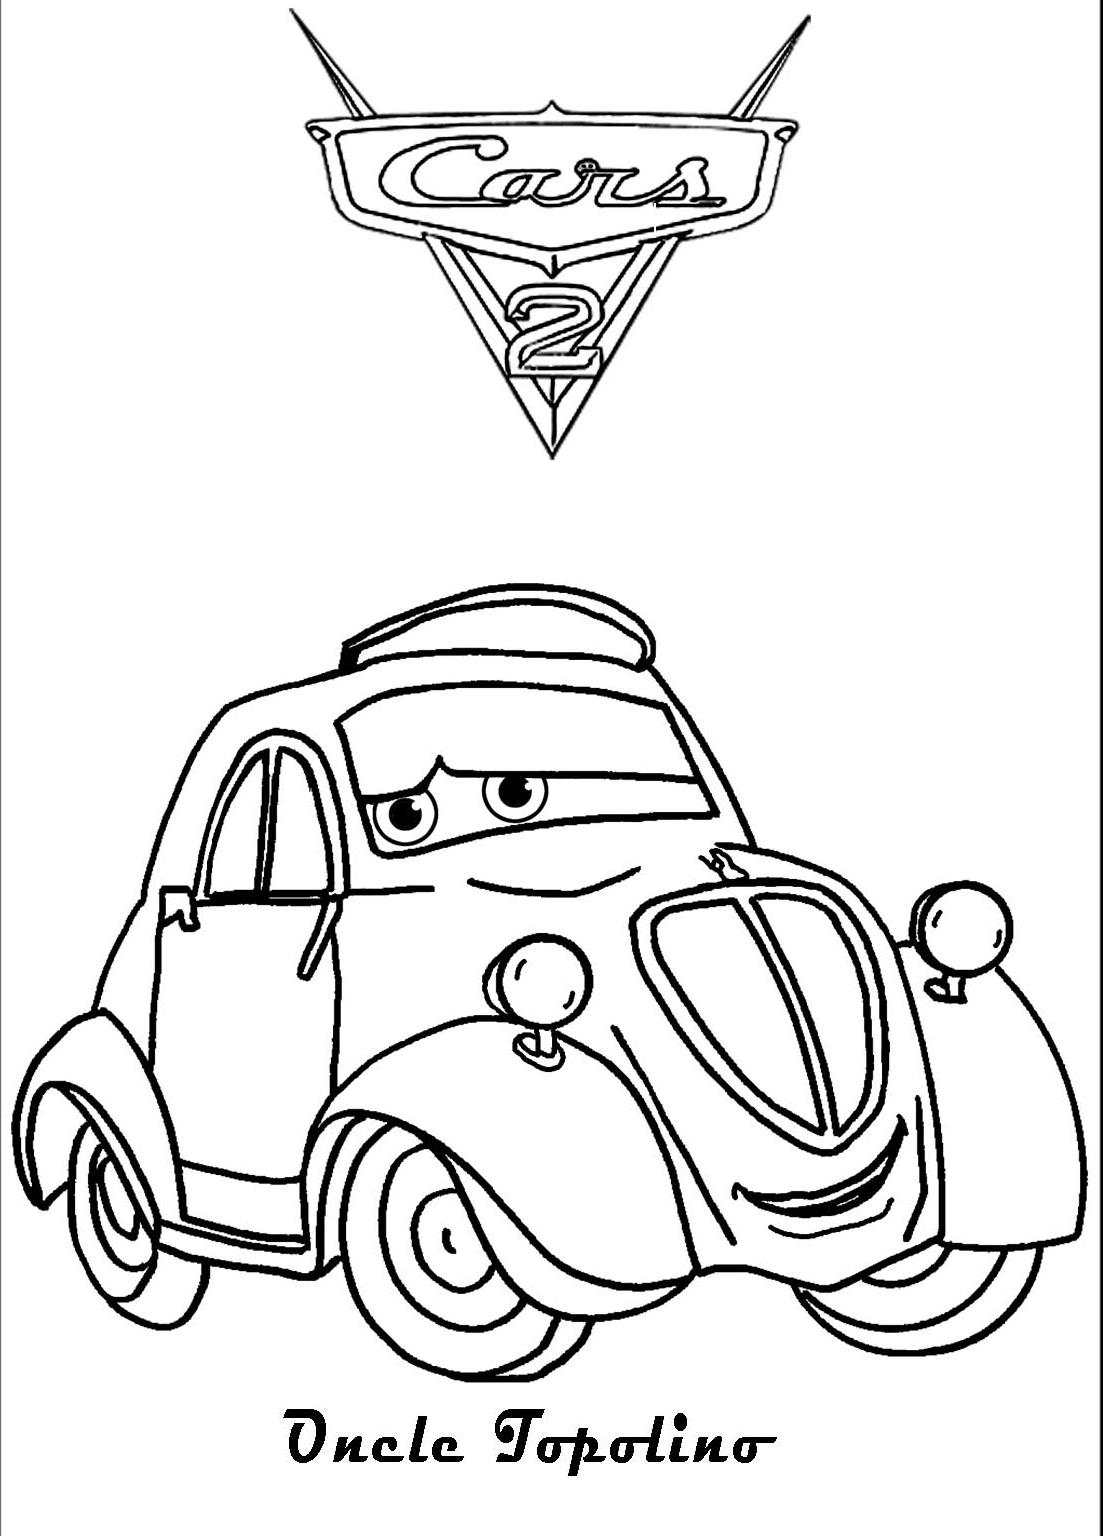 uncle grandpa coloring pages for free - photo #25